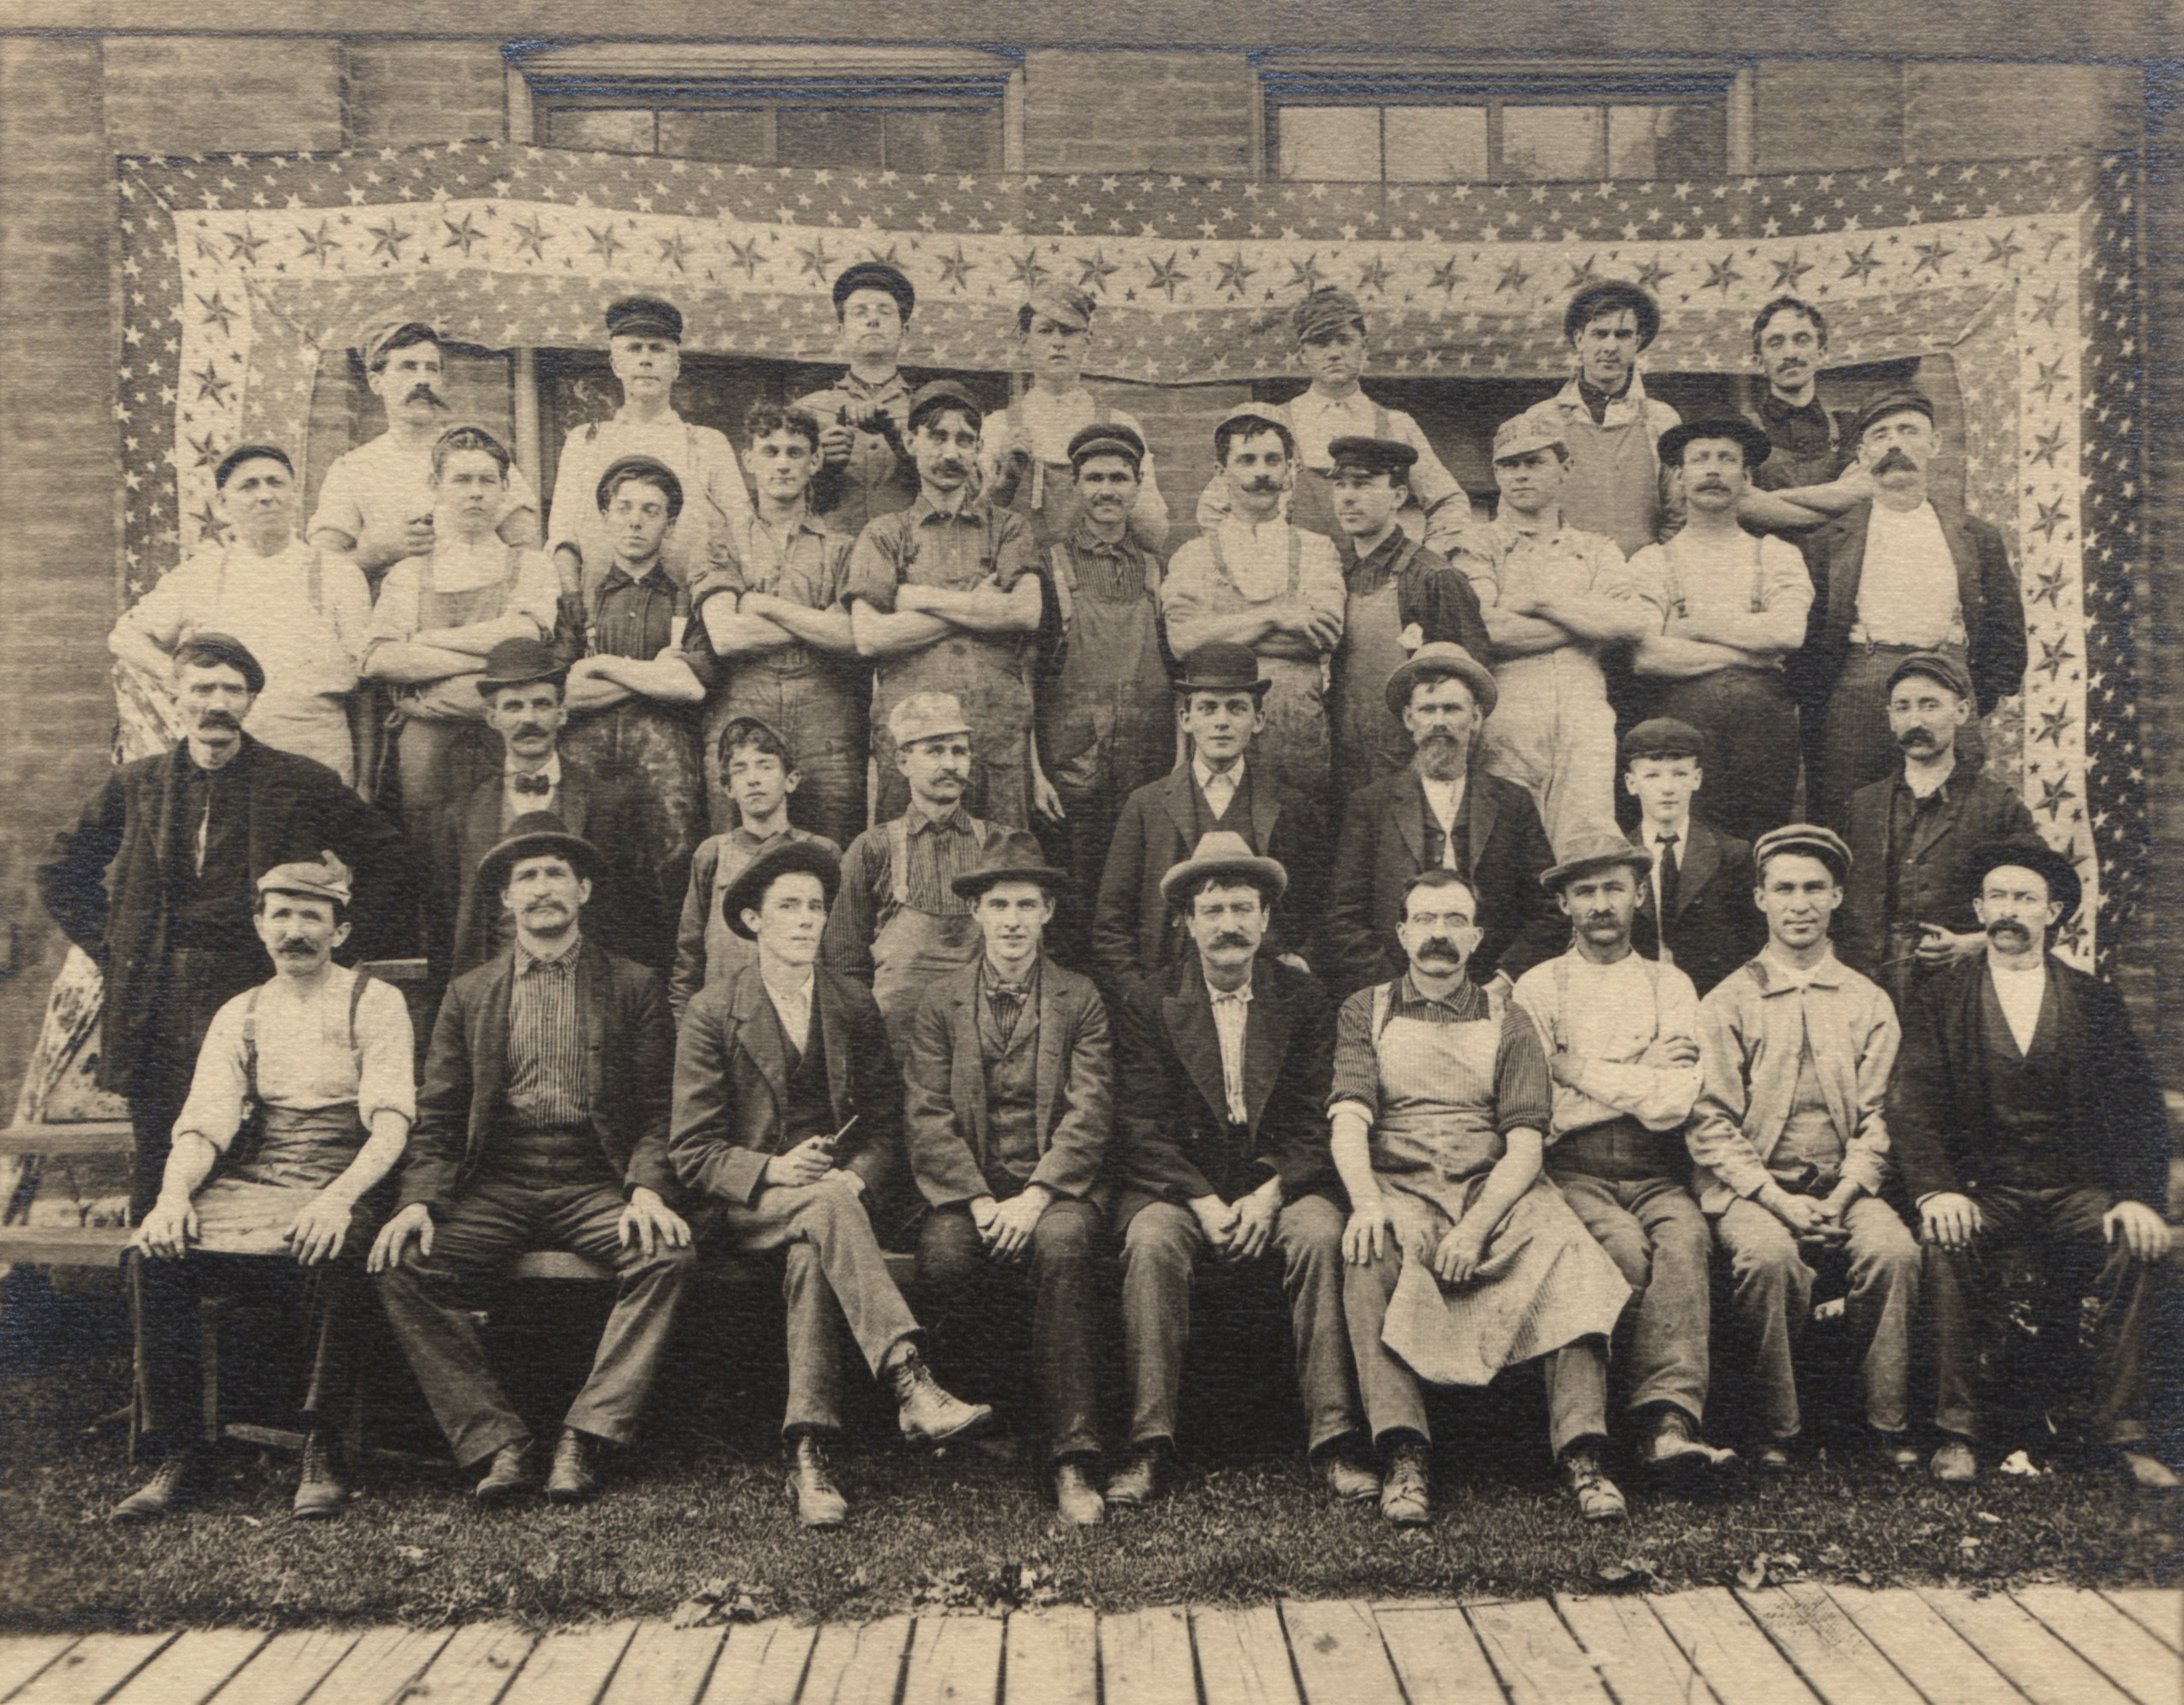 Black and white group portrait of automobile industry workers posed in front of a stars and stripped patterned banner backdrop 